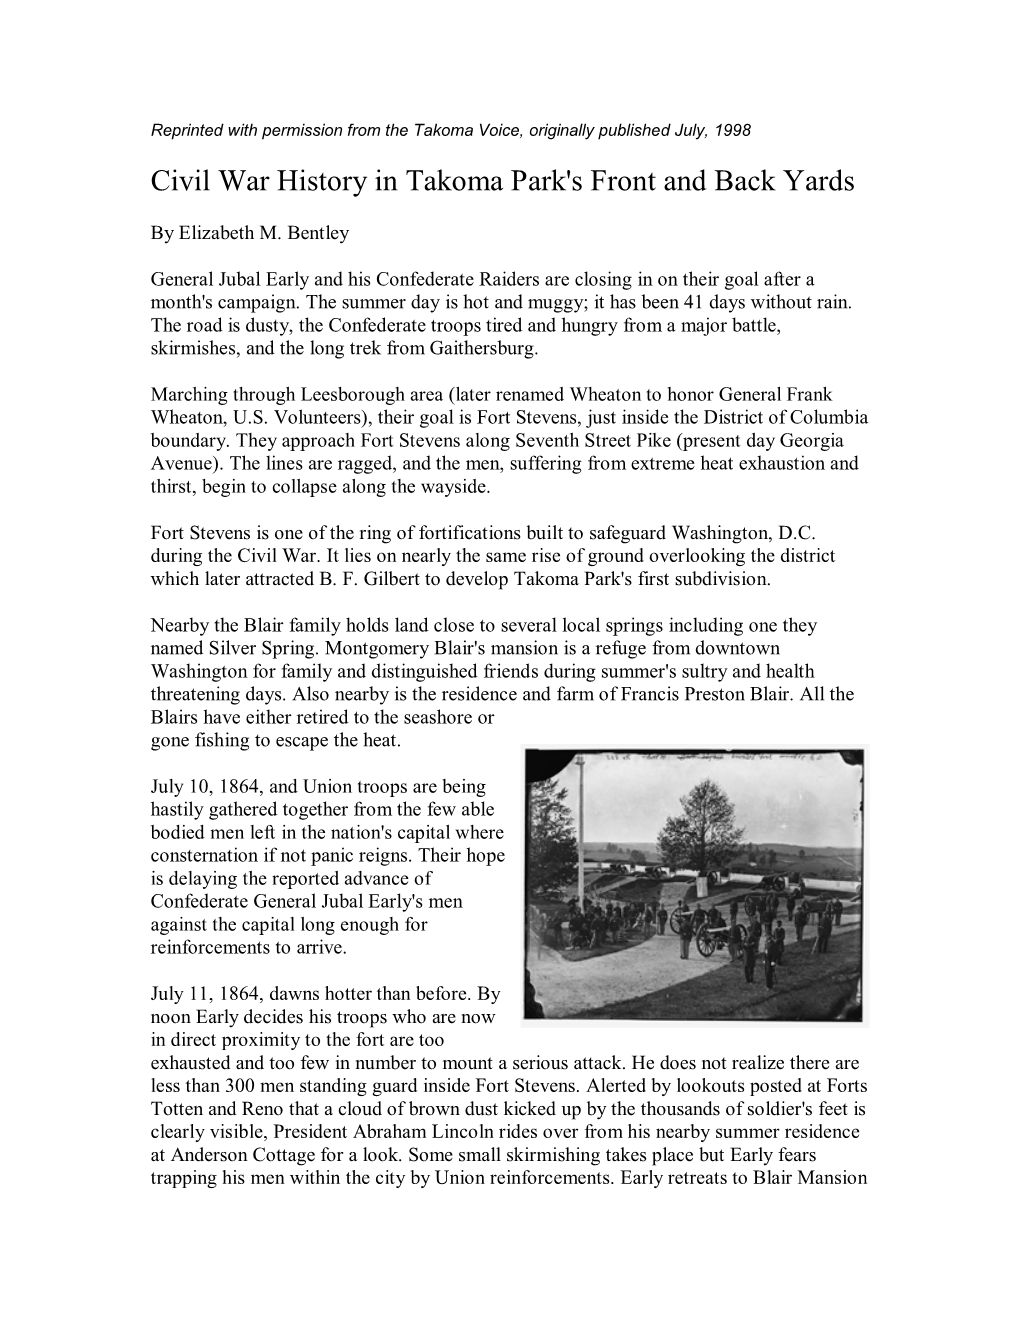 Civil War History in Takoma Park's Front and Back Yards